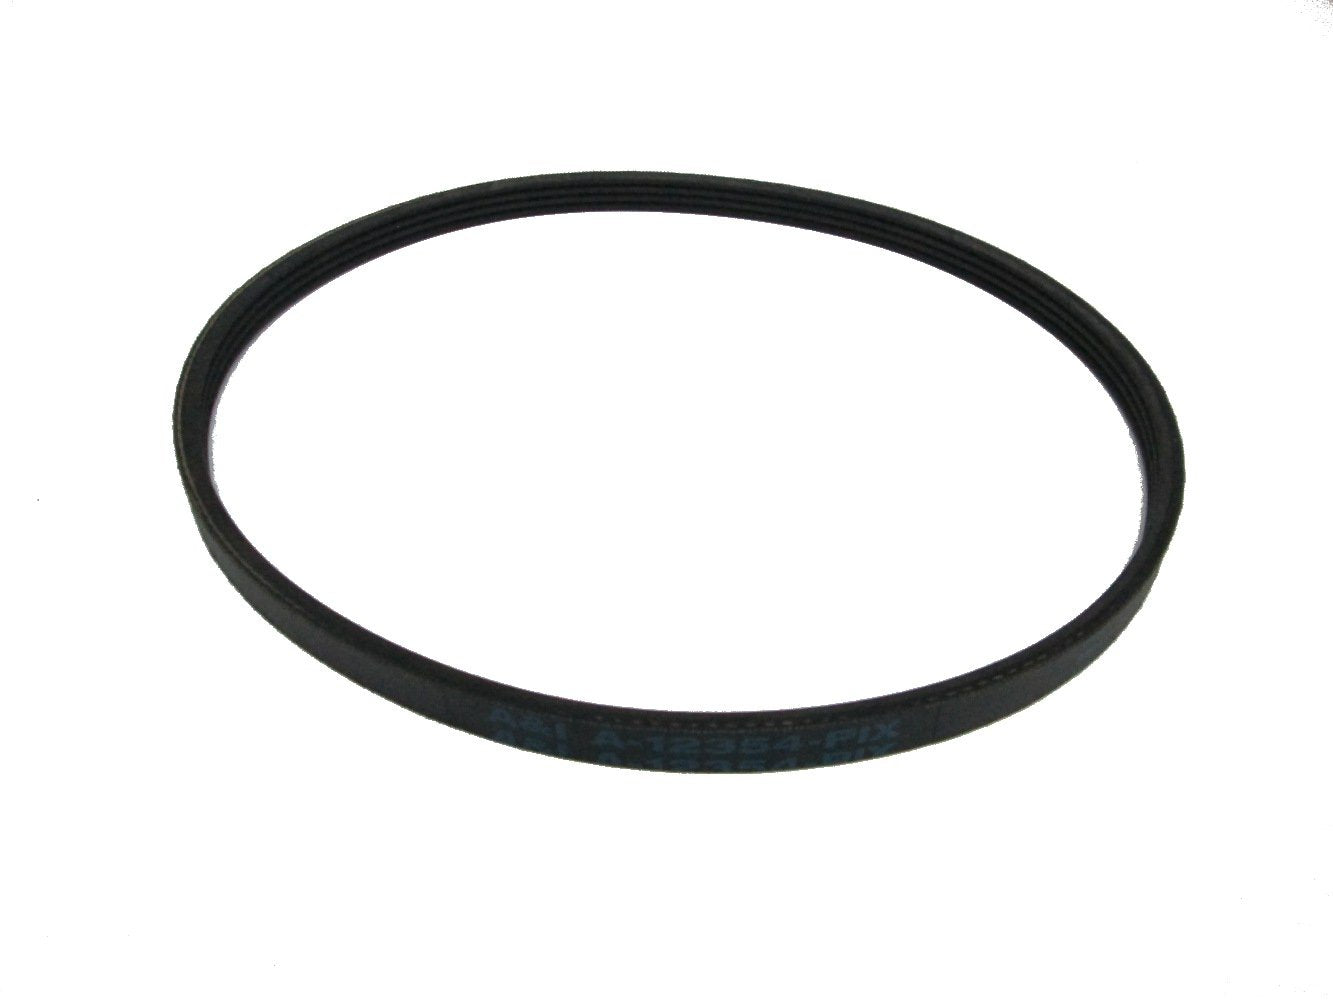 Replacement Drive Belt For Snapper #12354 - A-12354